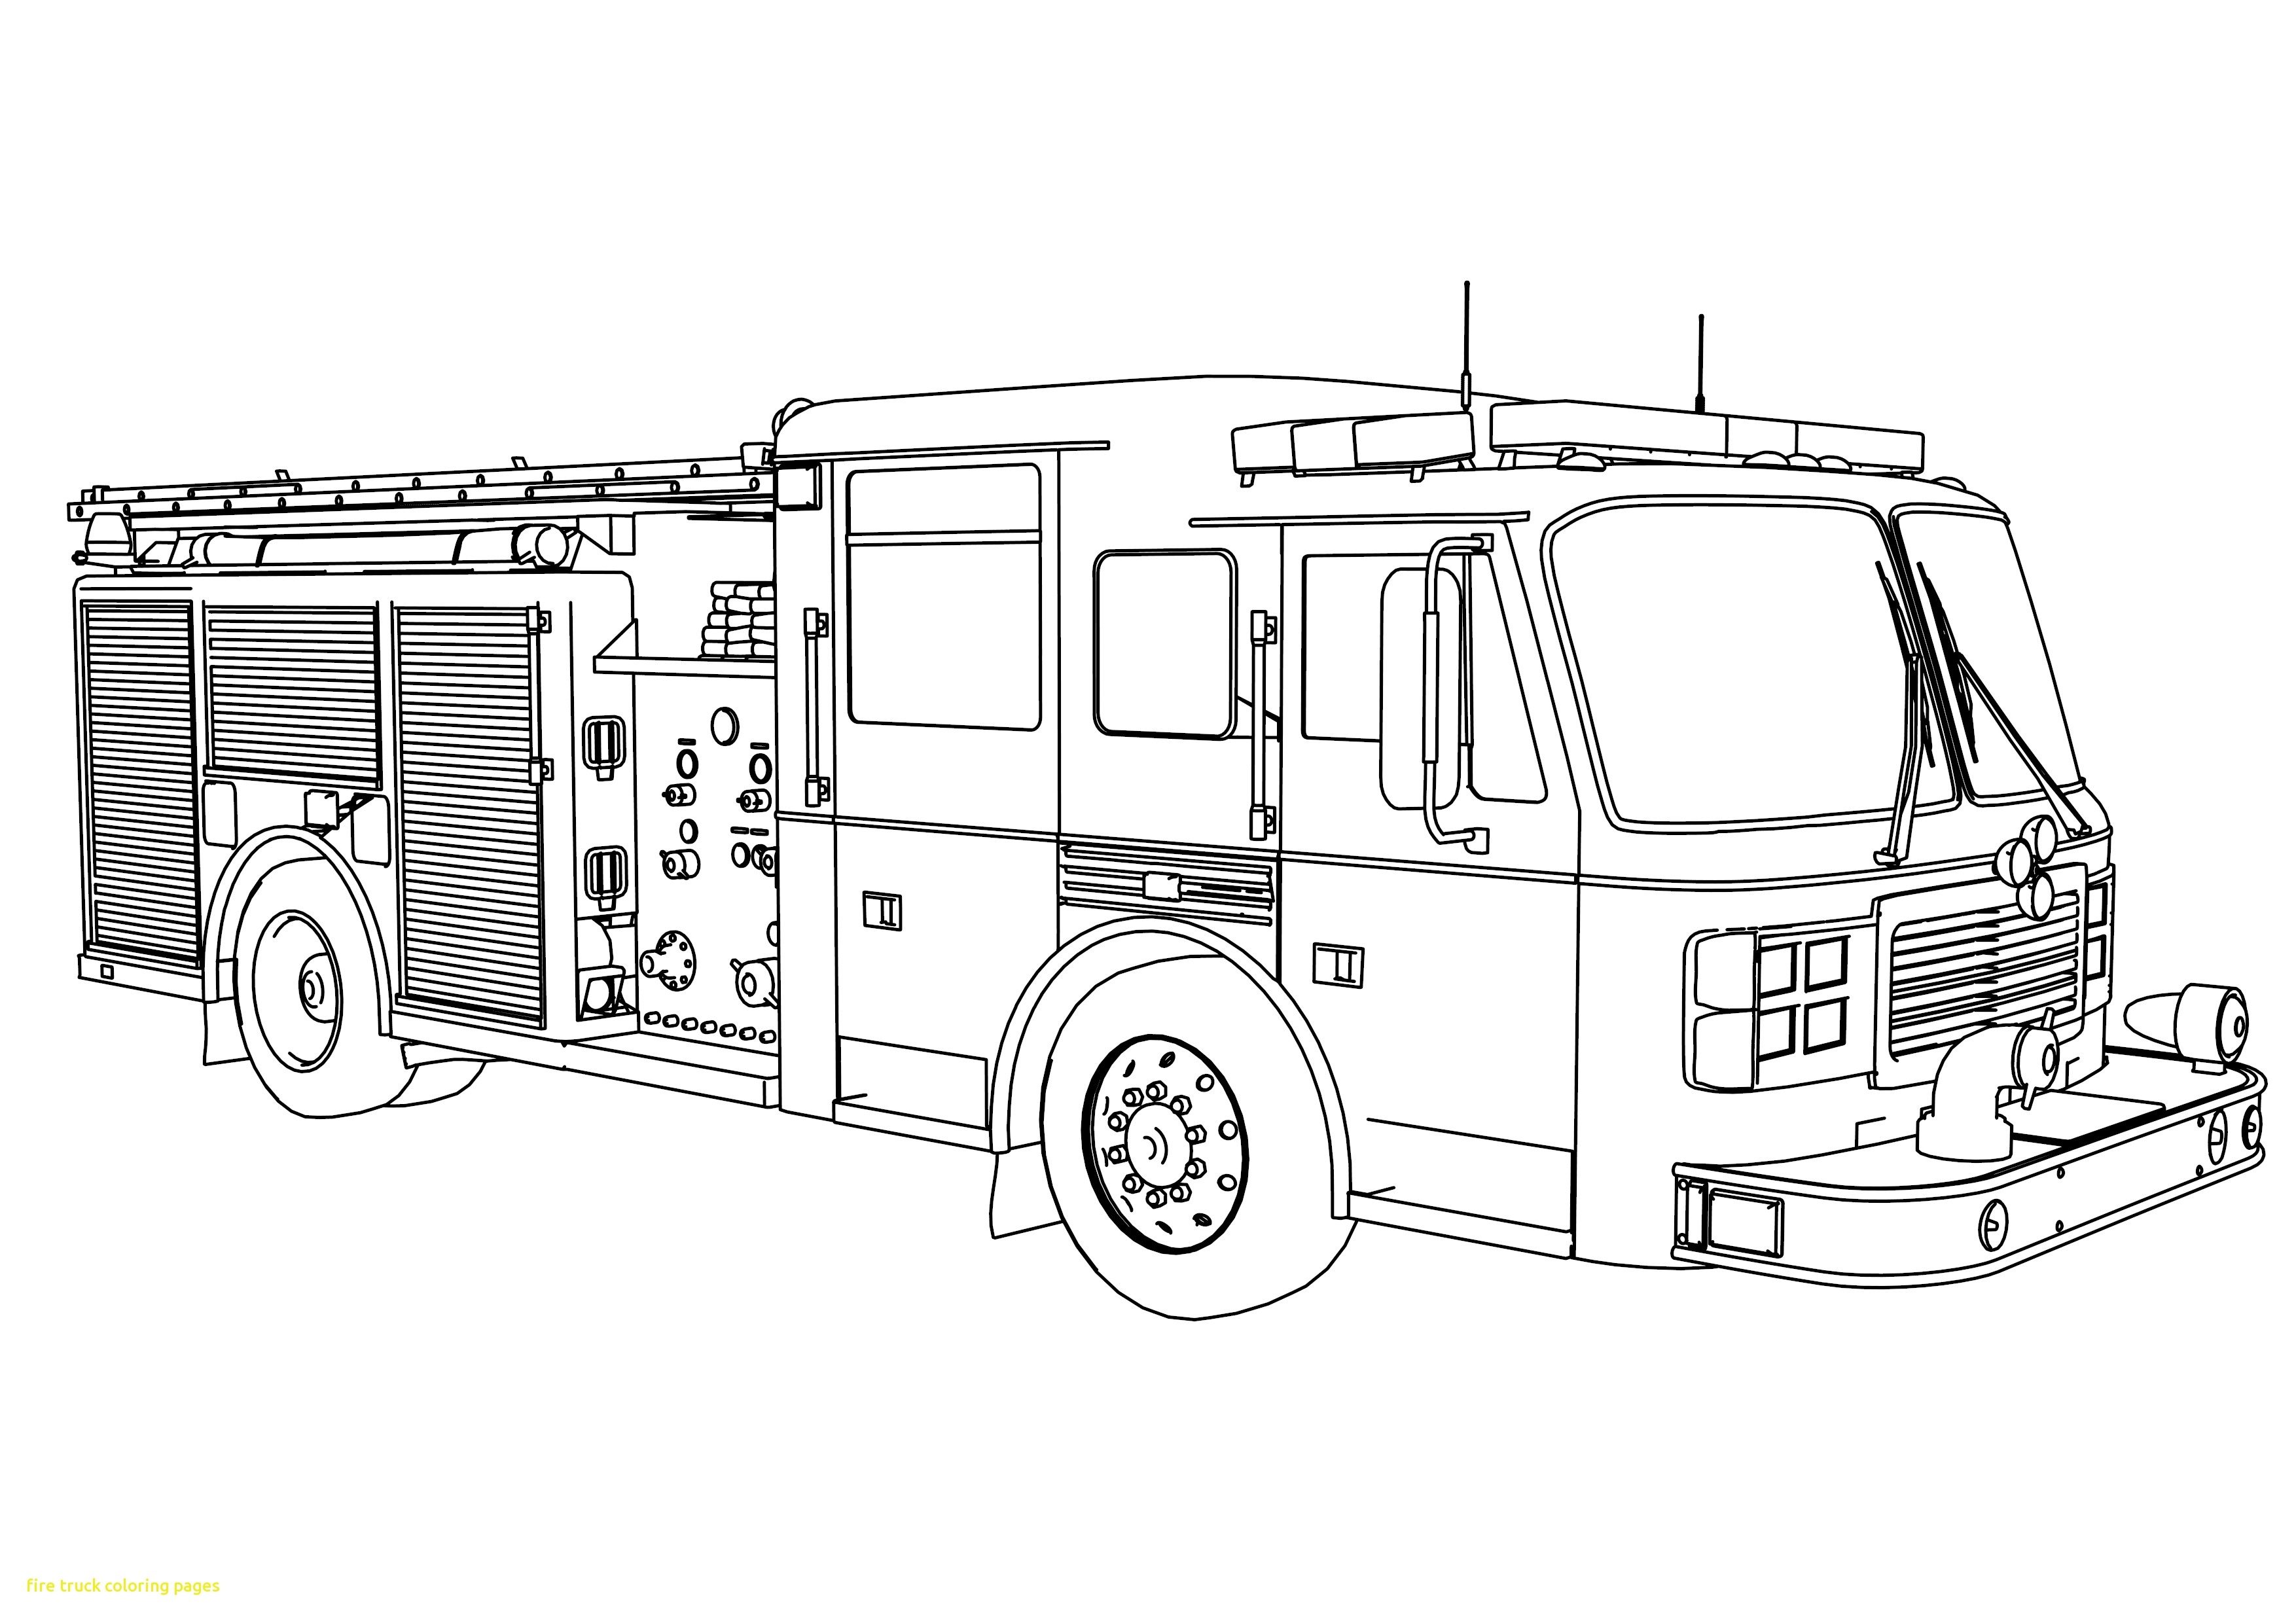 Download Printable Fire Truck Coloring Pages at GetColorings.com | Free printable colorings pages to ...